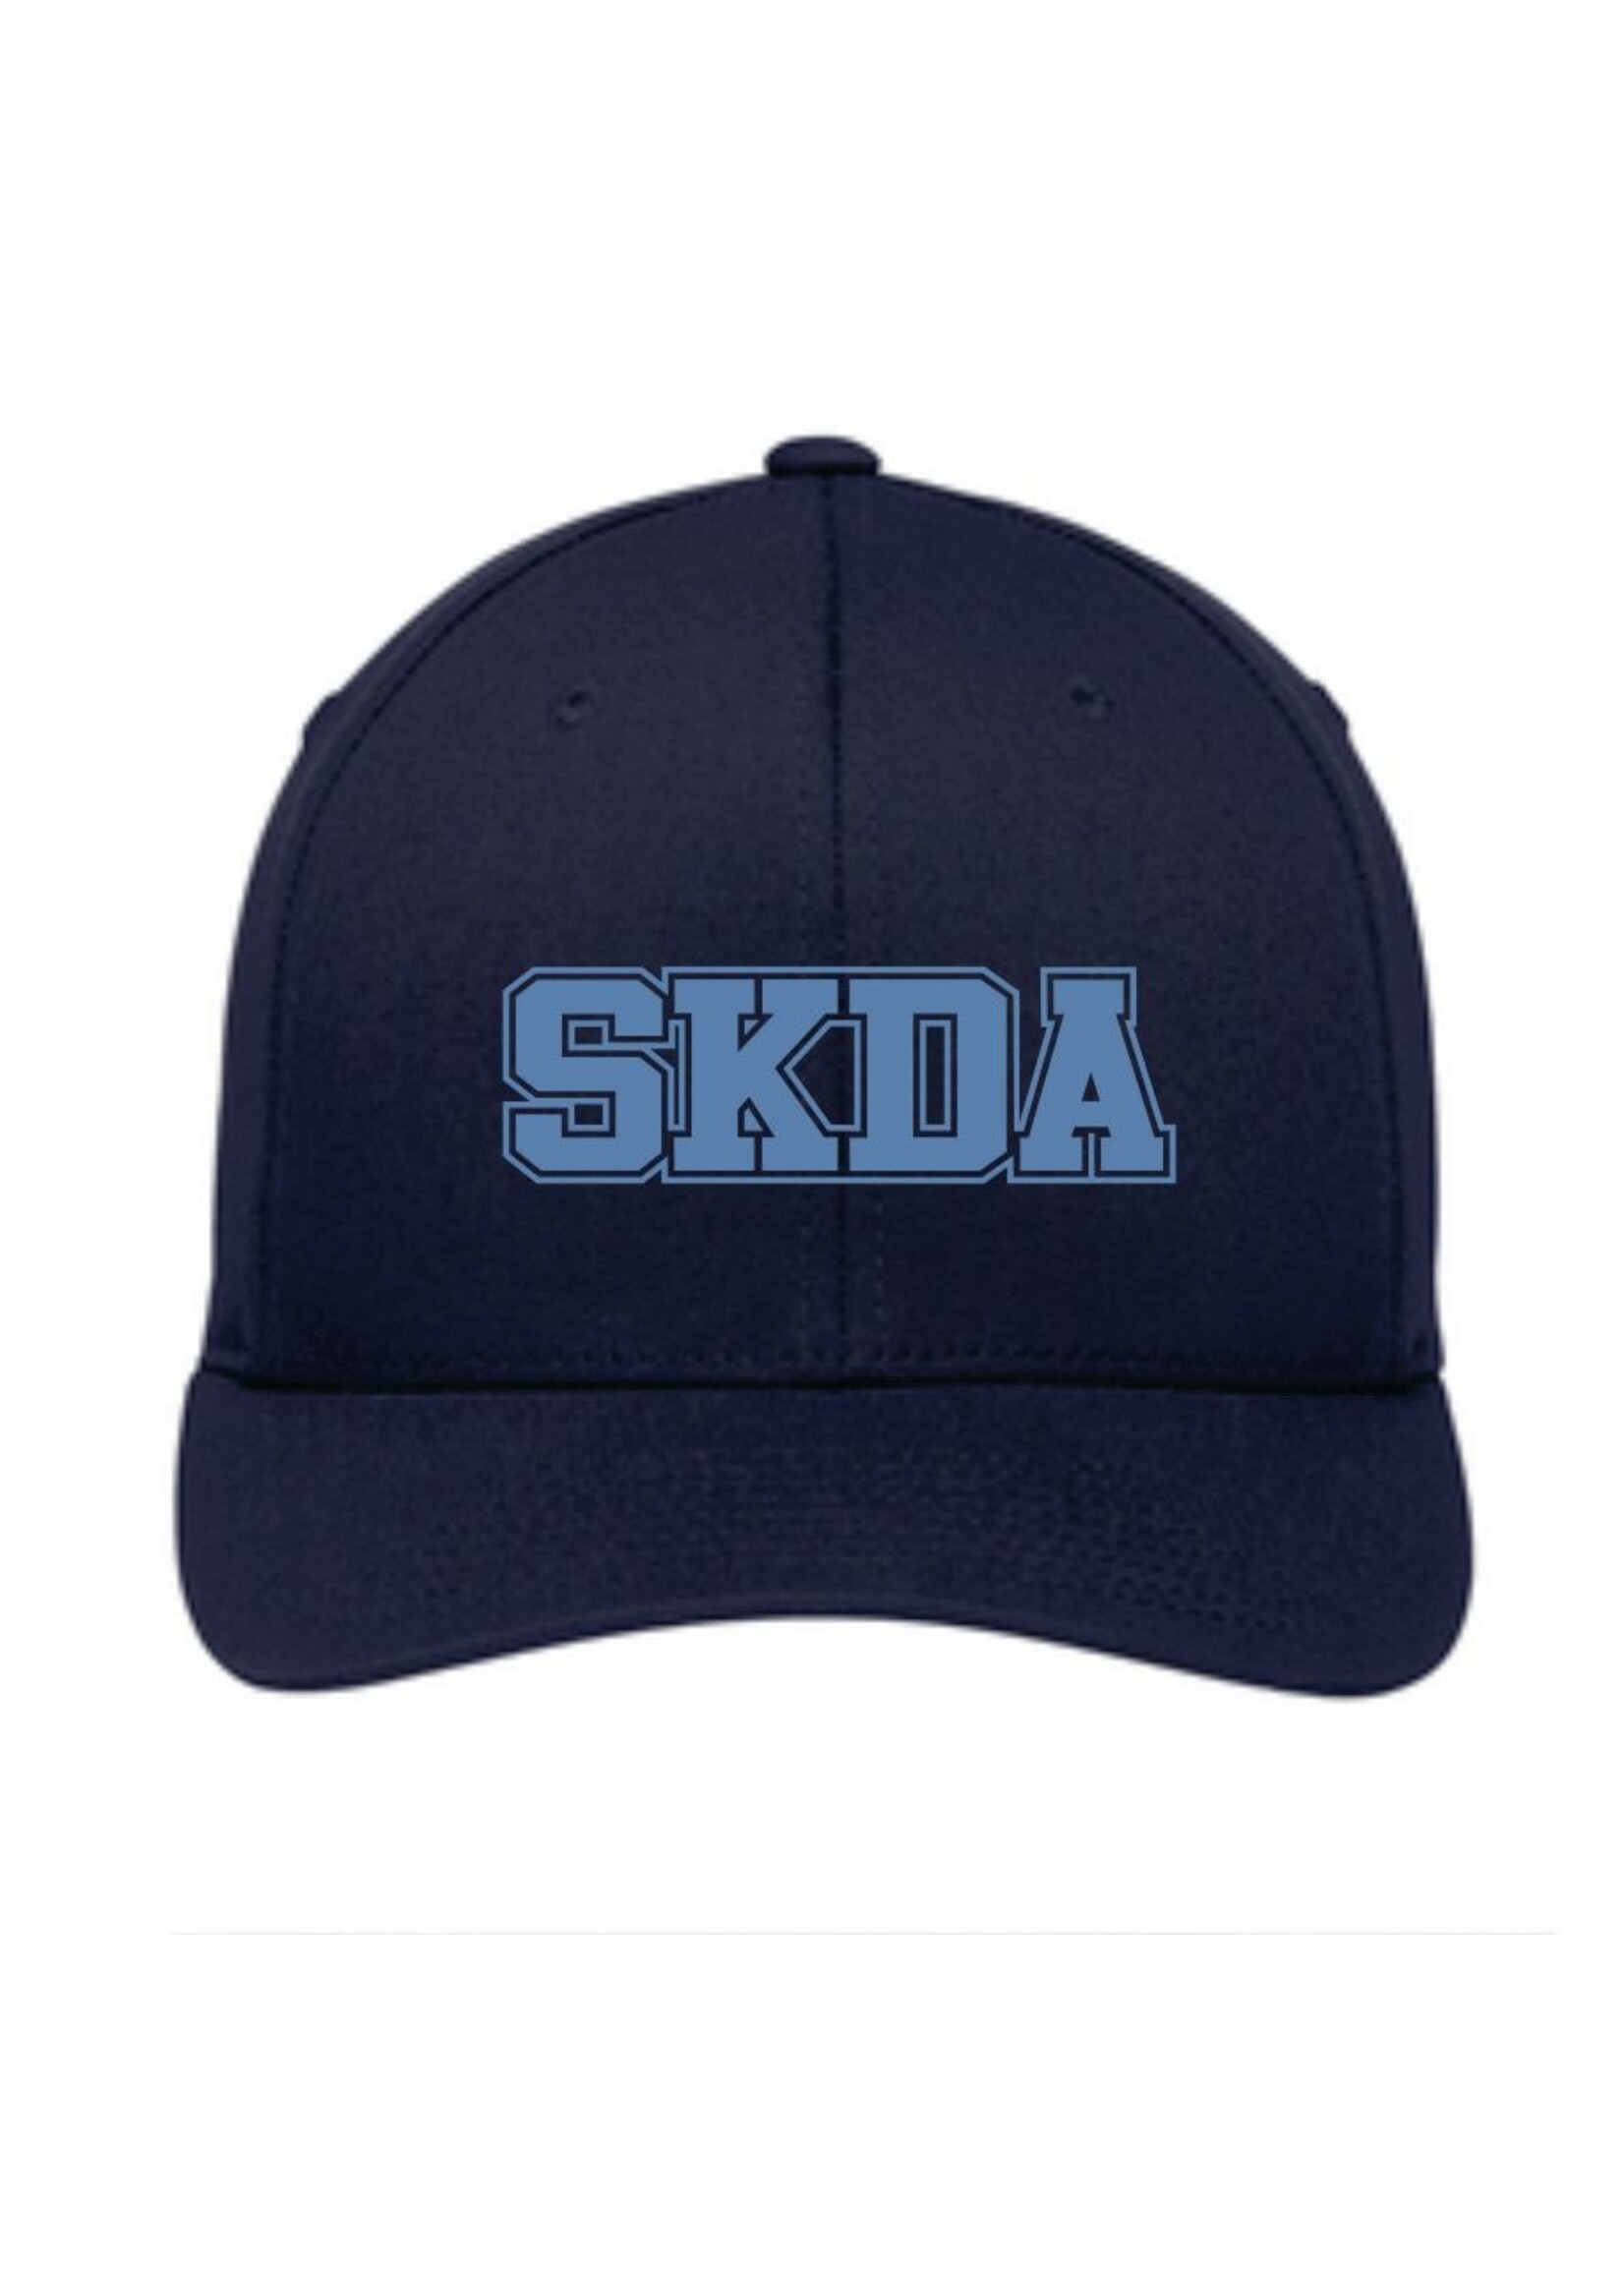 SKDA Fitted Navy Cap